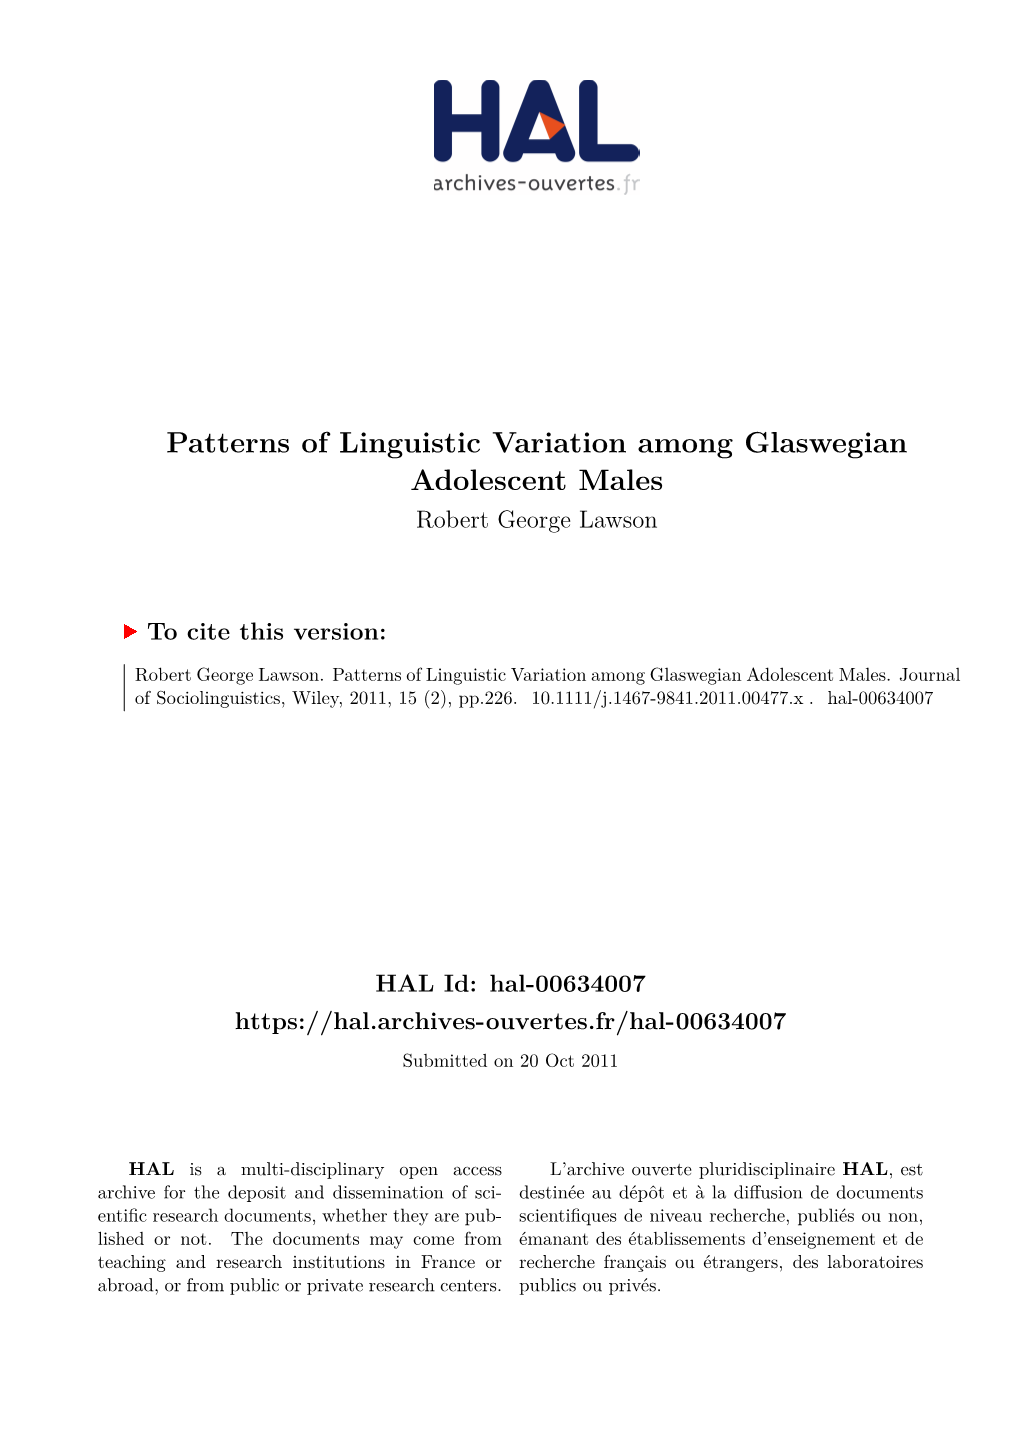 Patterns of Linguistic Variation Among Glaswegian Adolescent Males Robert George Lawson